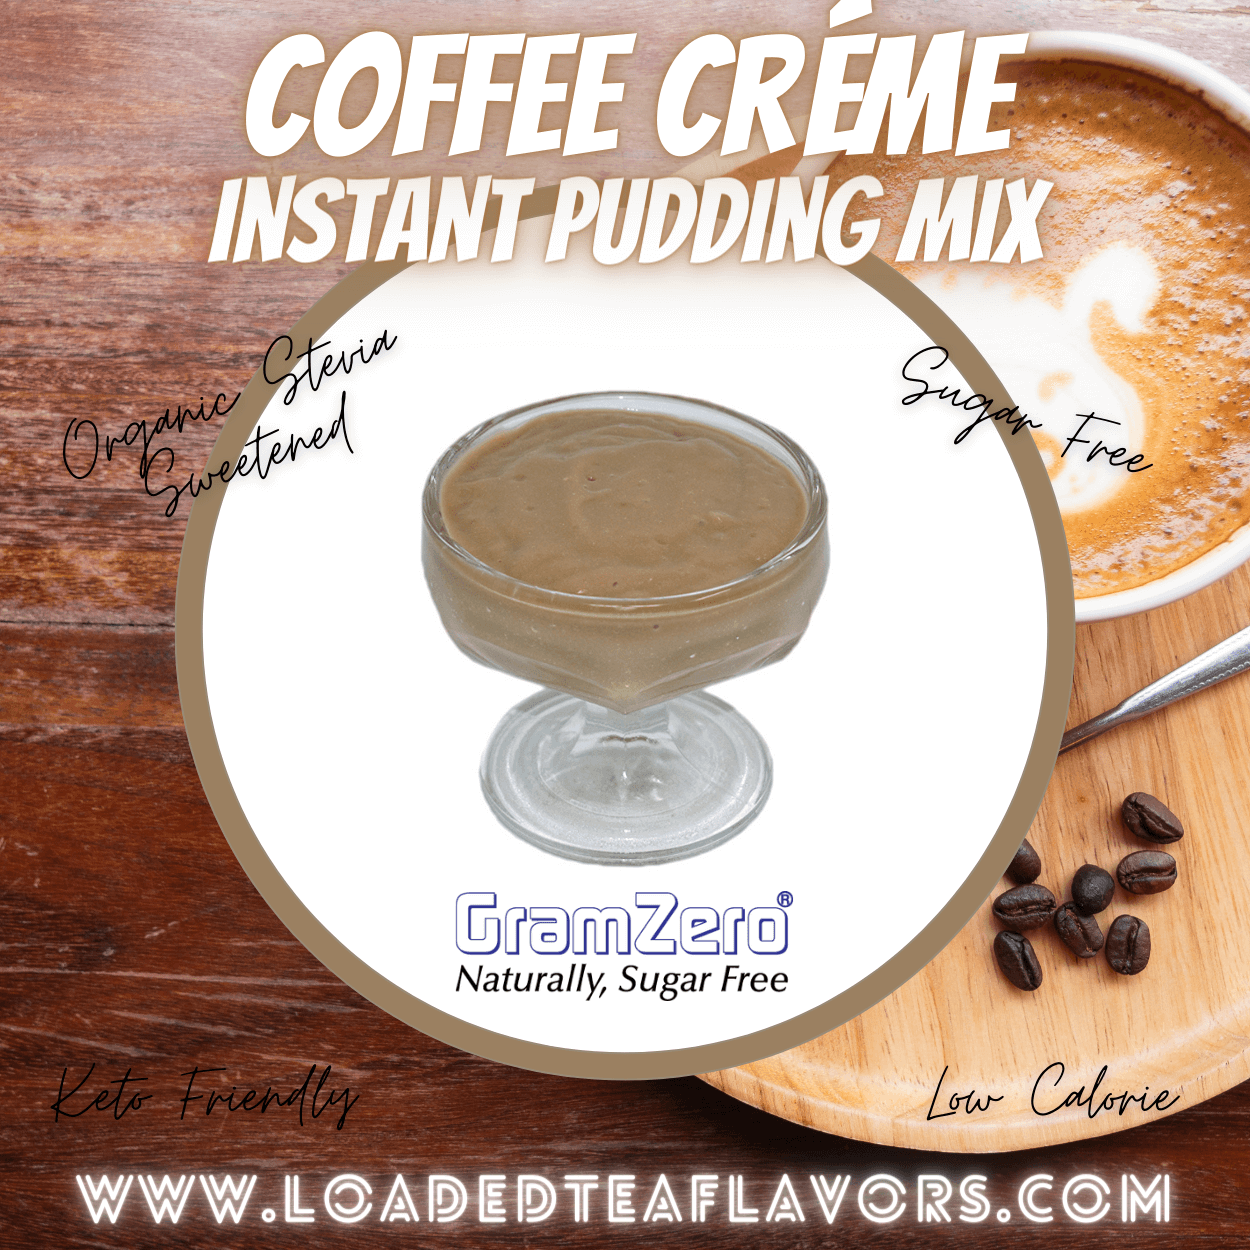 COFFEE CRÉME Sugar Free Pudding Mix ☕ Protein Shake Flavoring